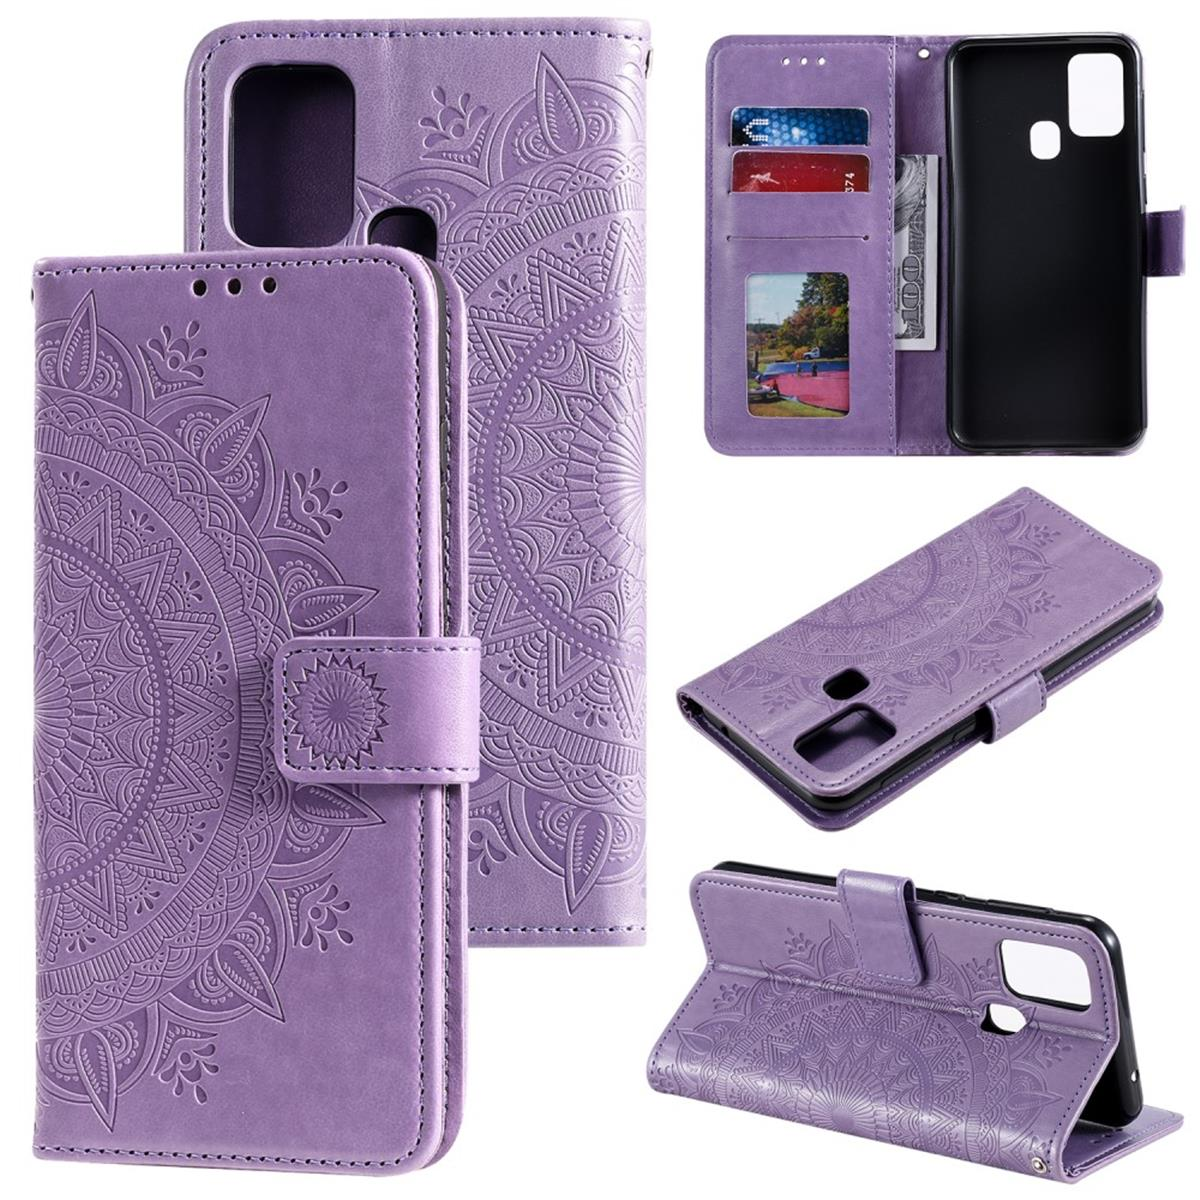 mit COVERKINGZ Muster, Bookcover, Klapphülle Mandala Lila Huawei, Y6p,